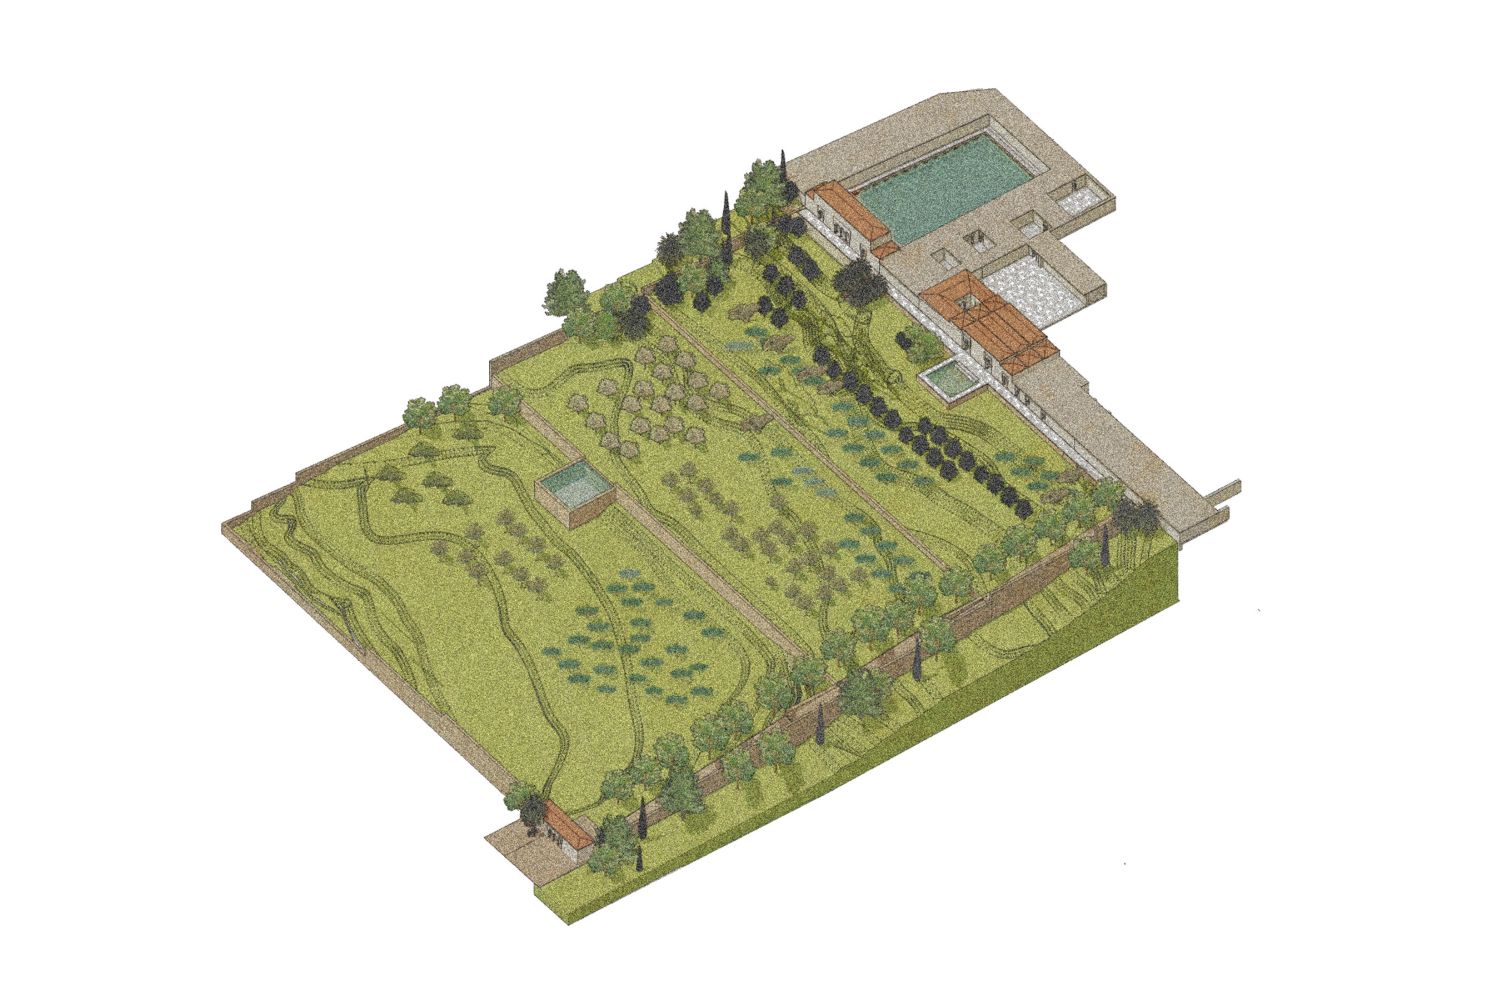 Hypothetical visualization showing aerial view of grounds.